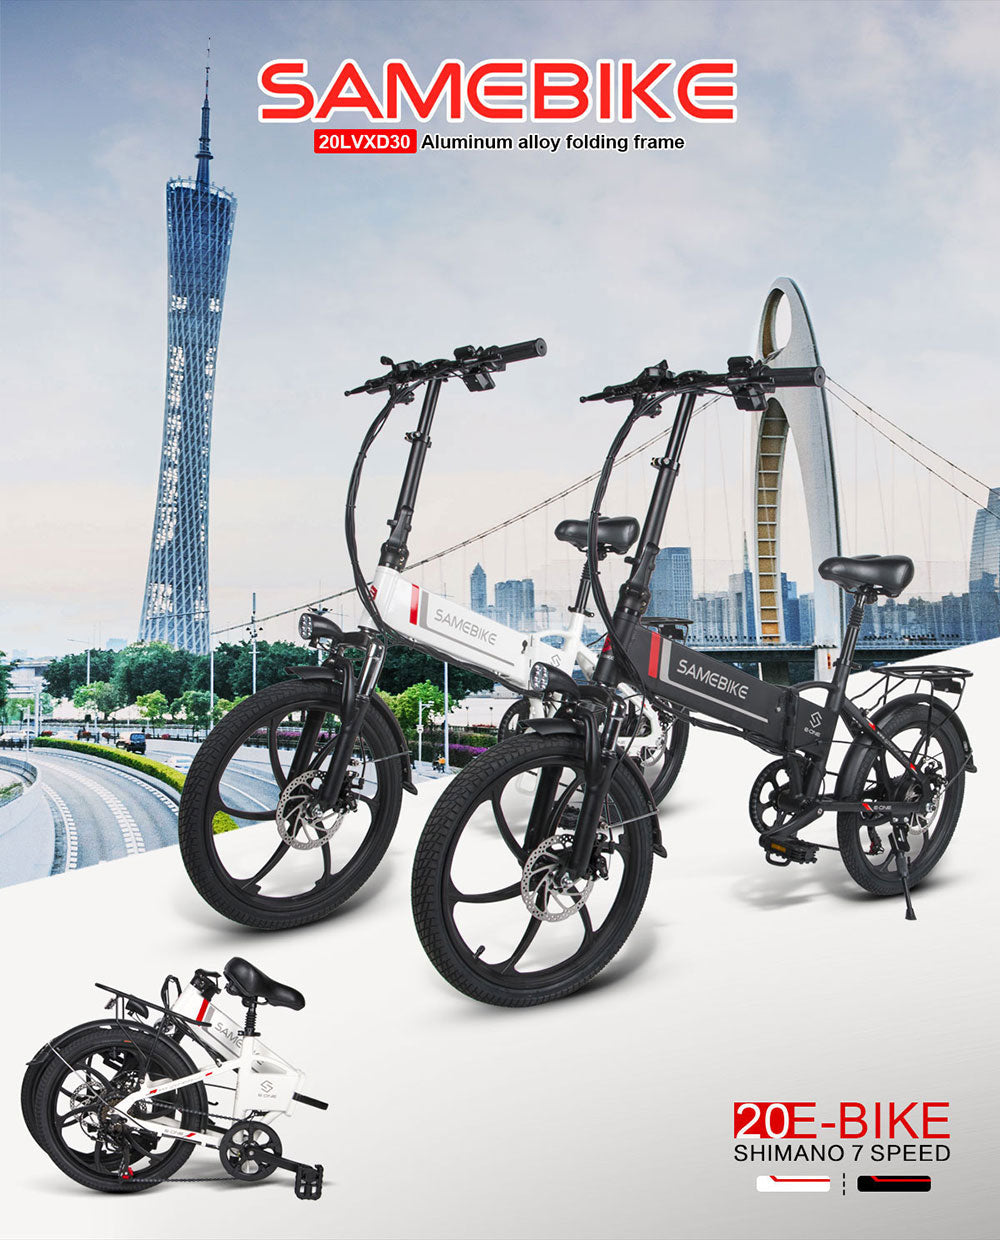 PL Warehouse Stock GYL090 48V 5 Speed 20" Foldable Electric Bicycle with 350W Brushless Motor